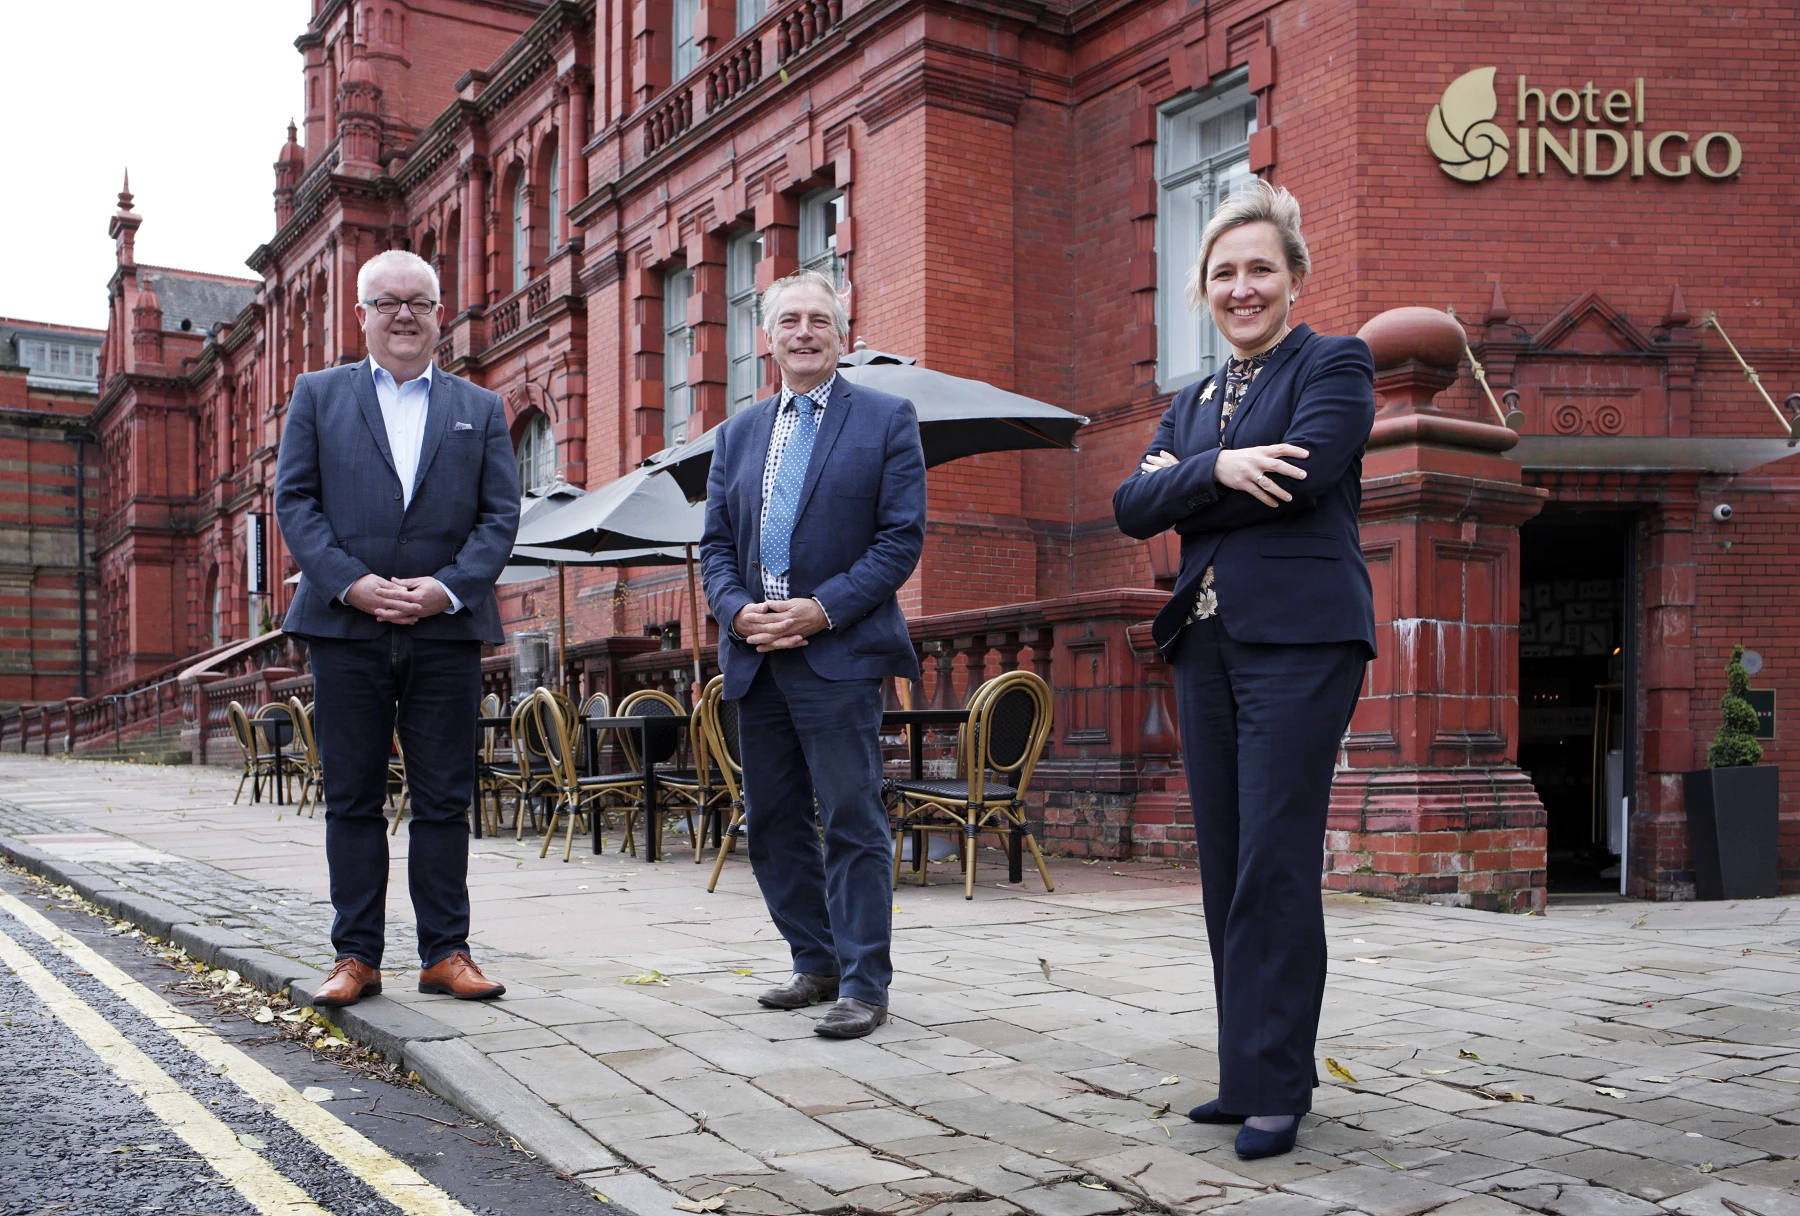 (L - R): Tom Orange, general manger at Hotel Indigo, Cllr James Rowlandson, cabinet member for Resources, Investment and Assets at Durham County Council, and Sarah Slaven, interim managing director at Business Durham.